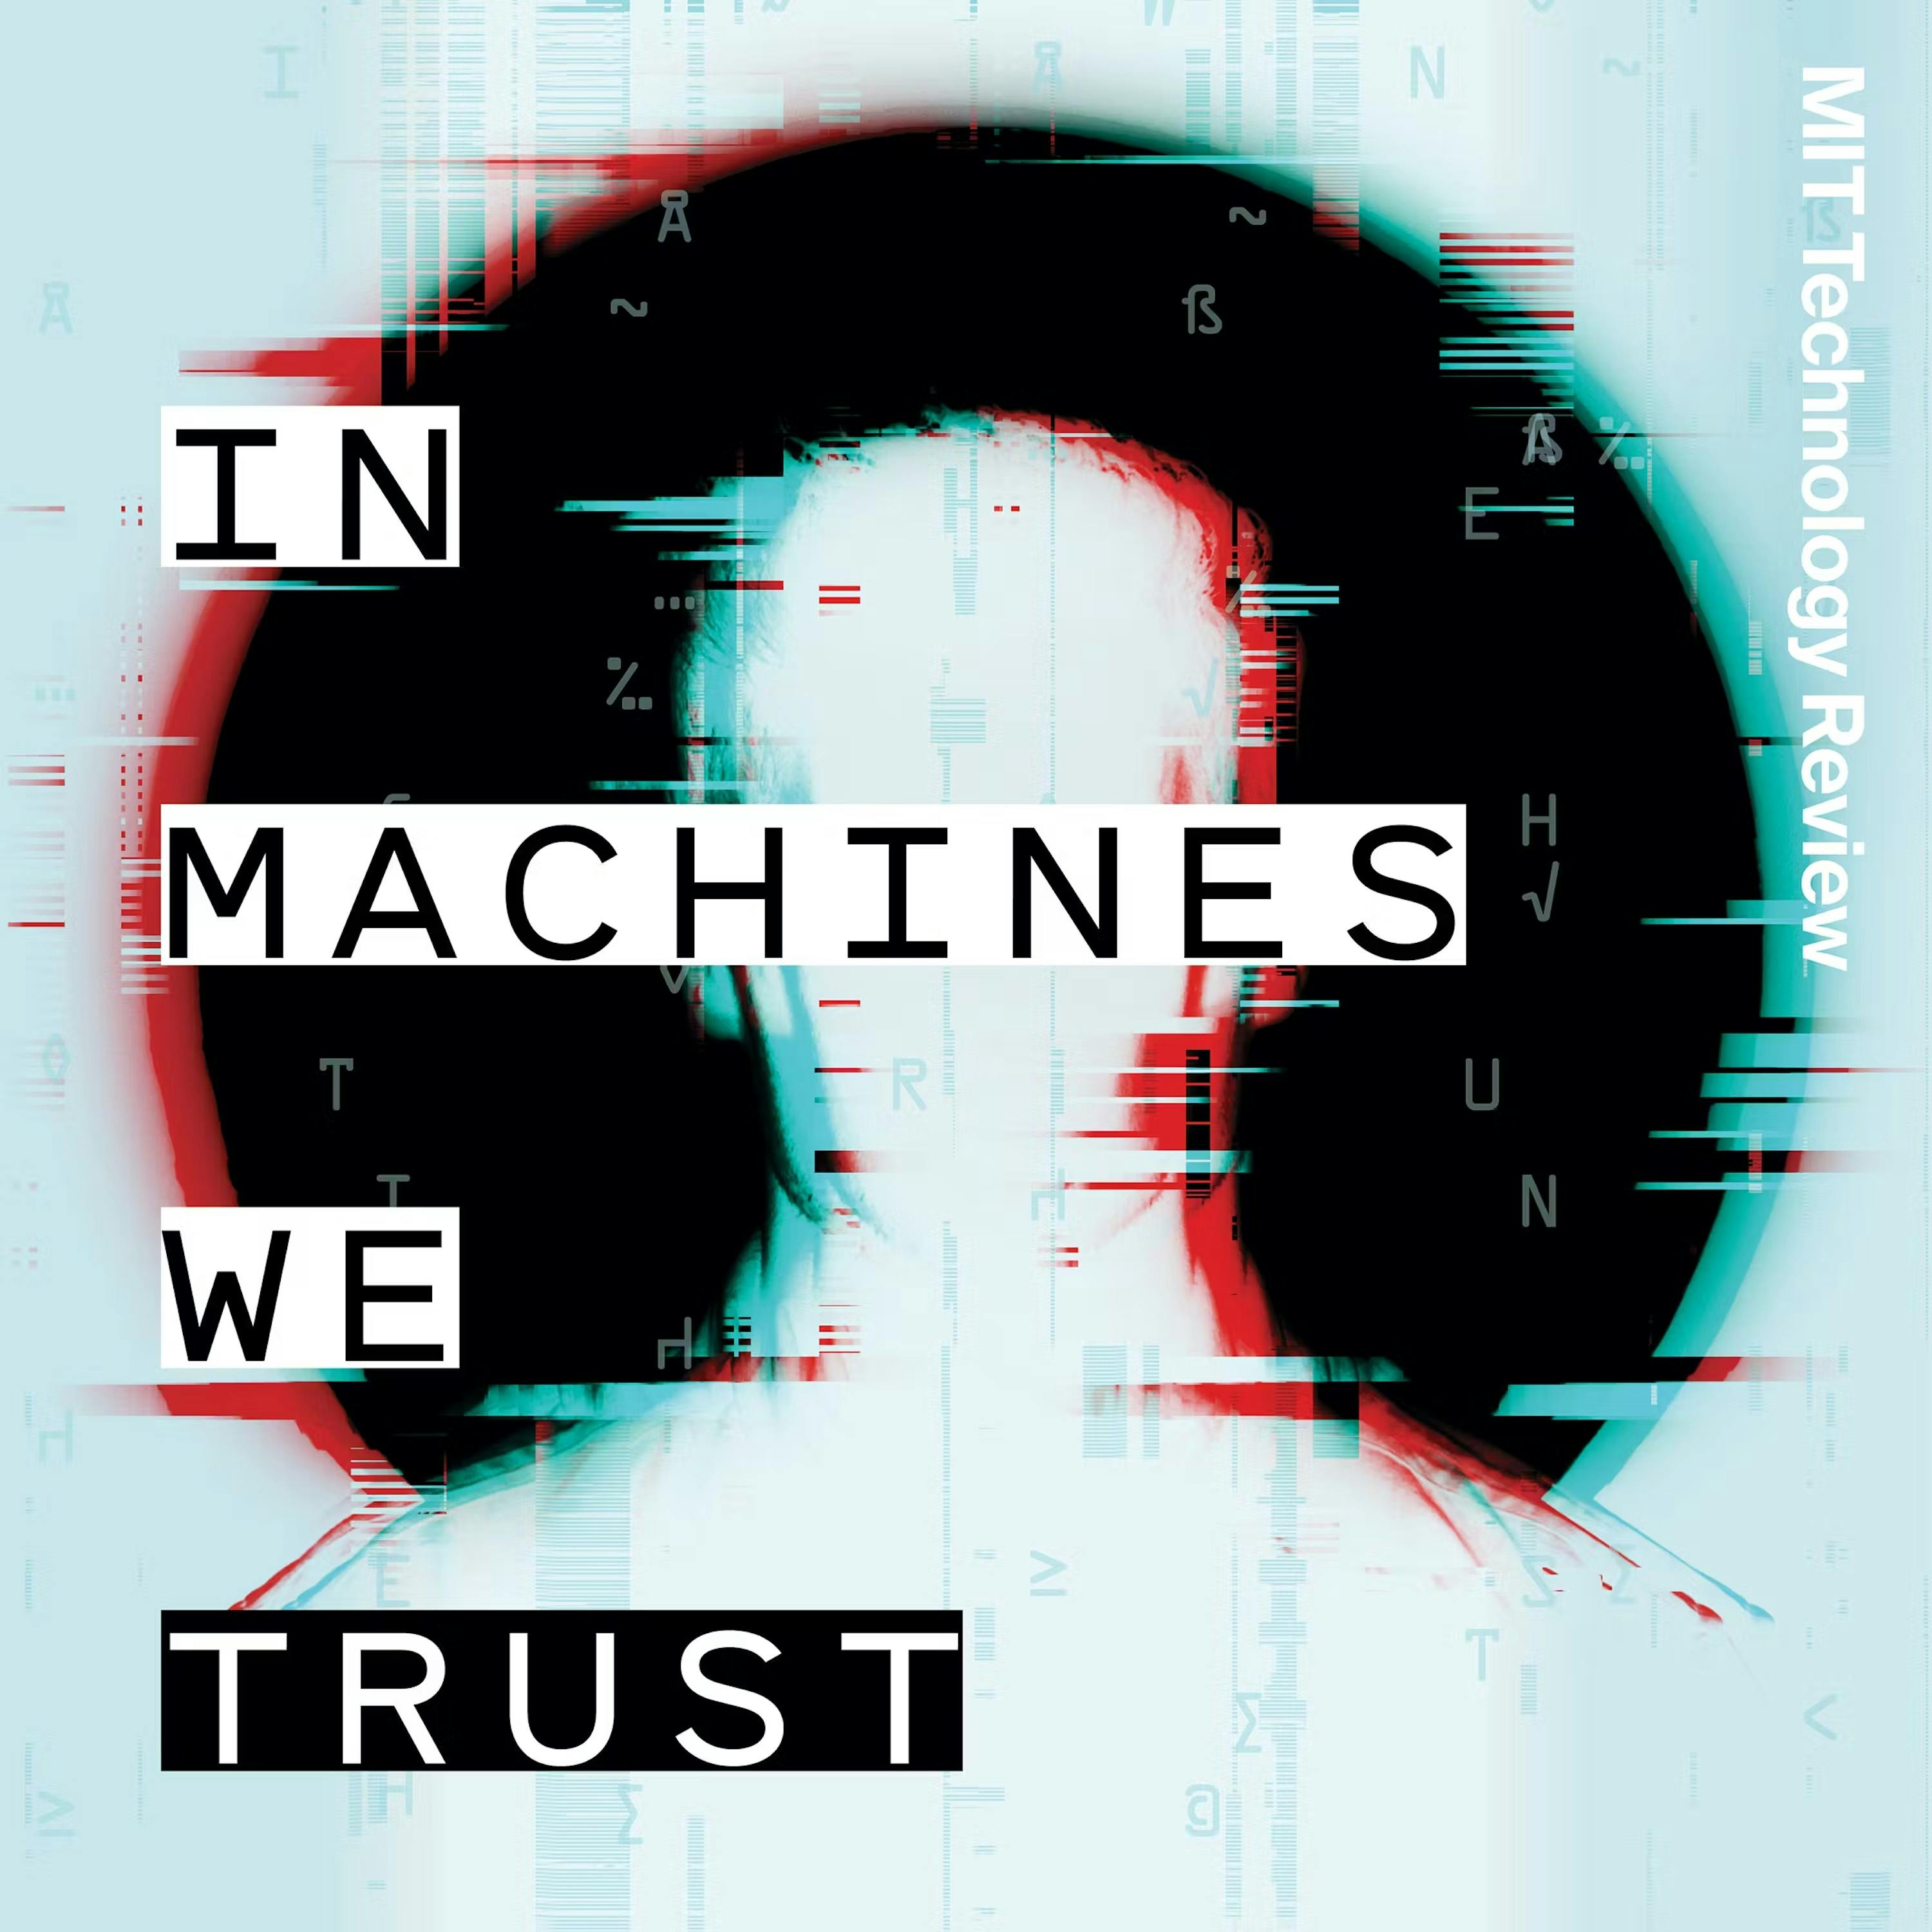 107. SPECIAL FEATURE: ‘In the cockpit with AI’ from In Machines We Trust